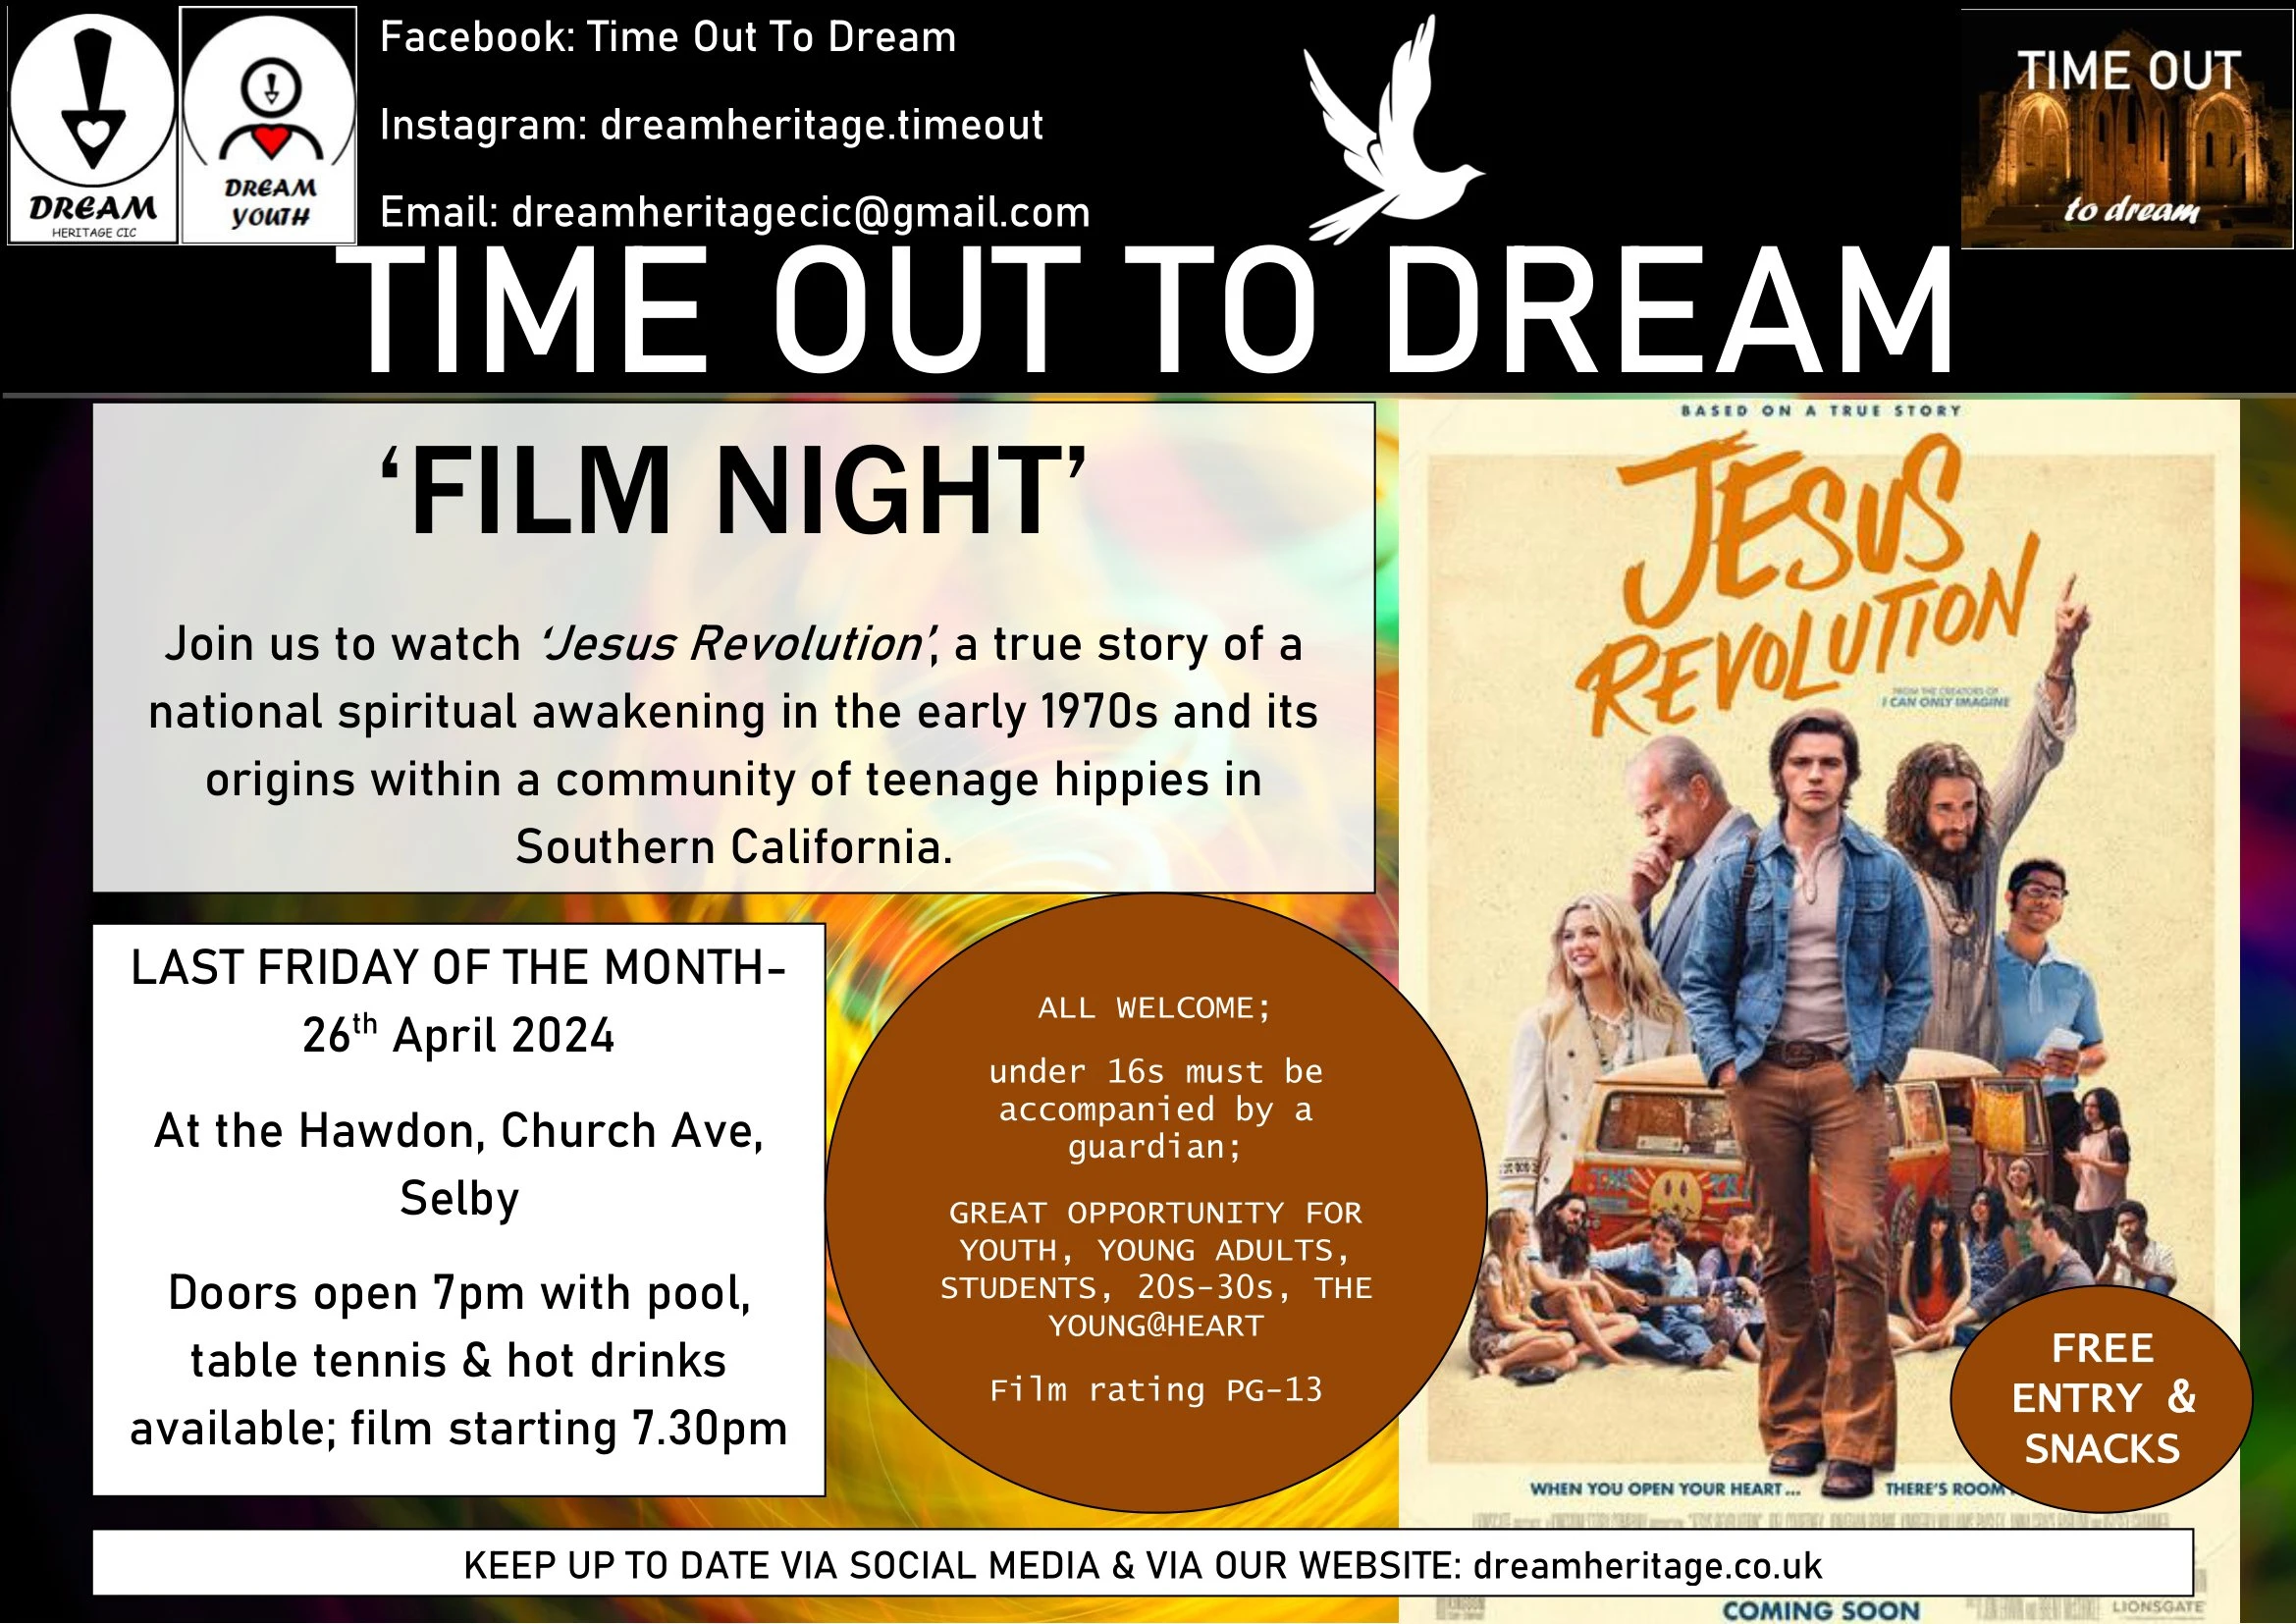 797-time-out-to-dream-26th-april-24-film-night-1-17132601282405.jpg